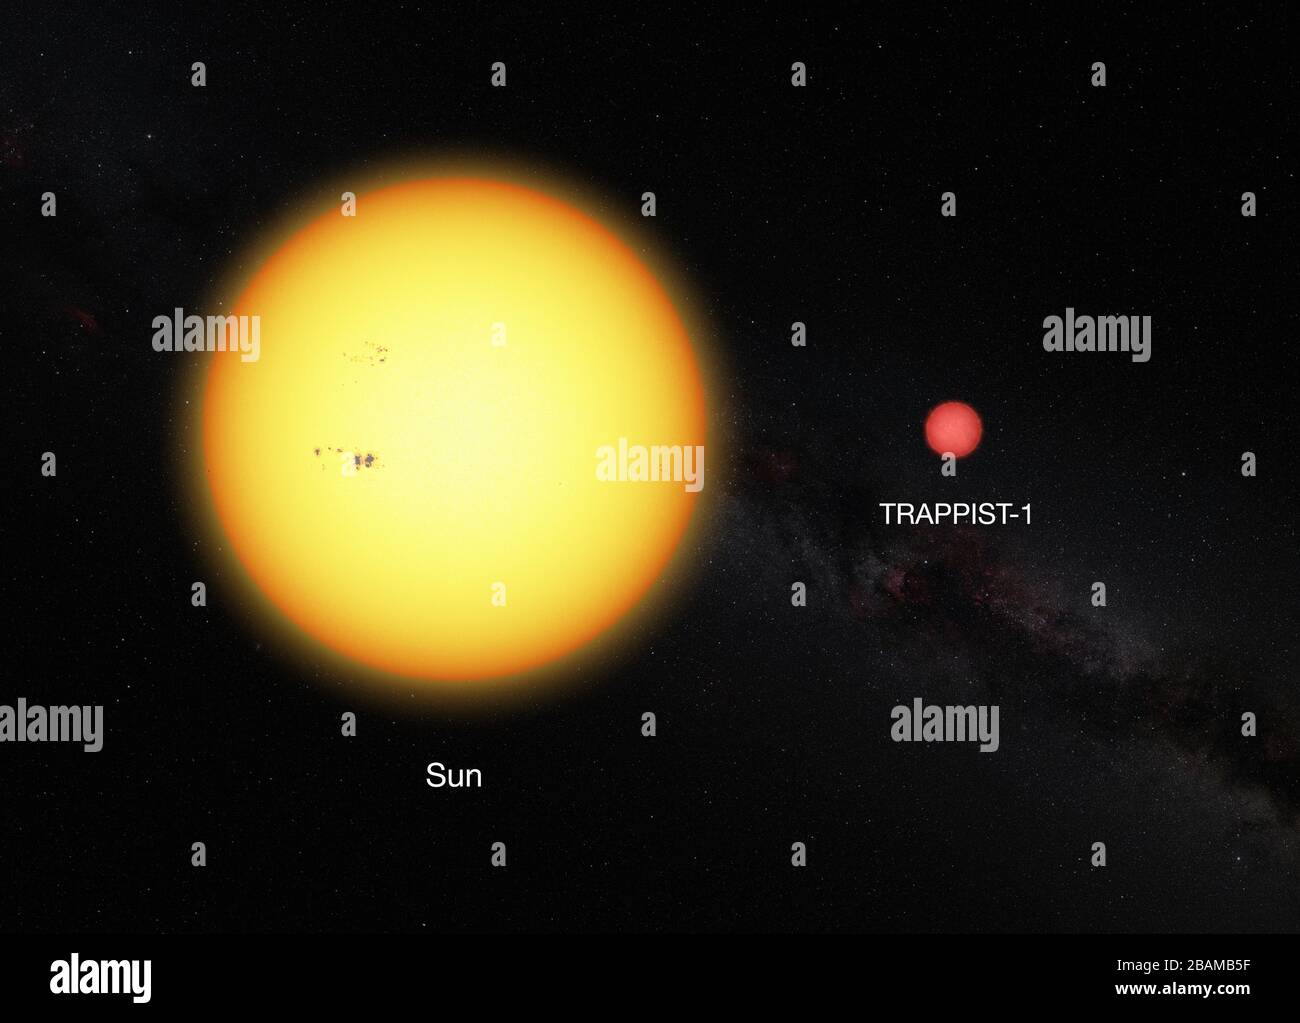 'English: This picture shows the Sun and the ultracool dwarf star TRAPPIST-1 to scale. The faint star has only 11% of the diameter of the sun and is much redder in colour.; 2 May 2016, 17:00:00; http://www.eso.org/public/images/eso1615e/; ESO; ' Stock Photo